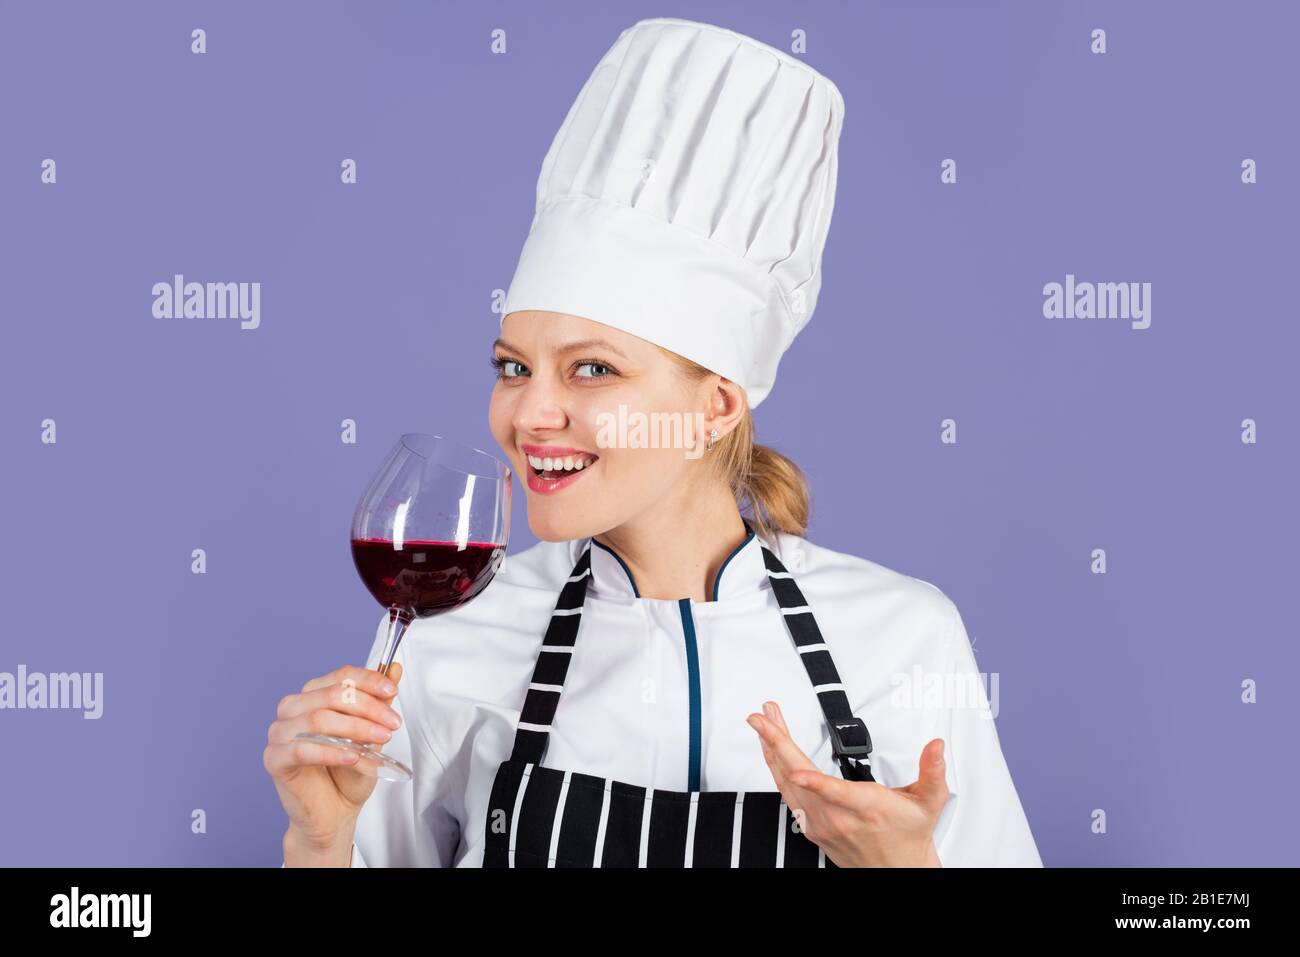 sweet and soft. sommelier with red cabernet or merlot. Restaurant beverage concept. cook degusting wine. woman hold wineglass in restaurant. perfect burgundy beverage. cook drink alcohol. Stock Photo